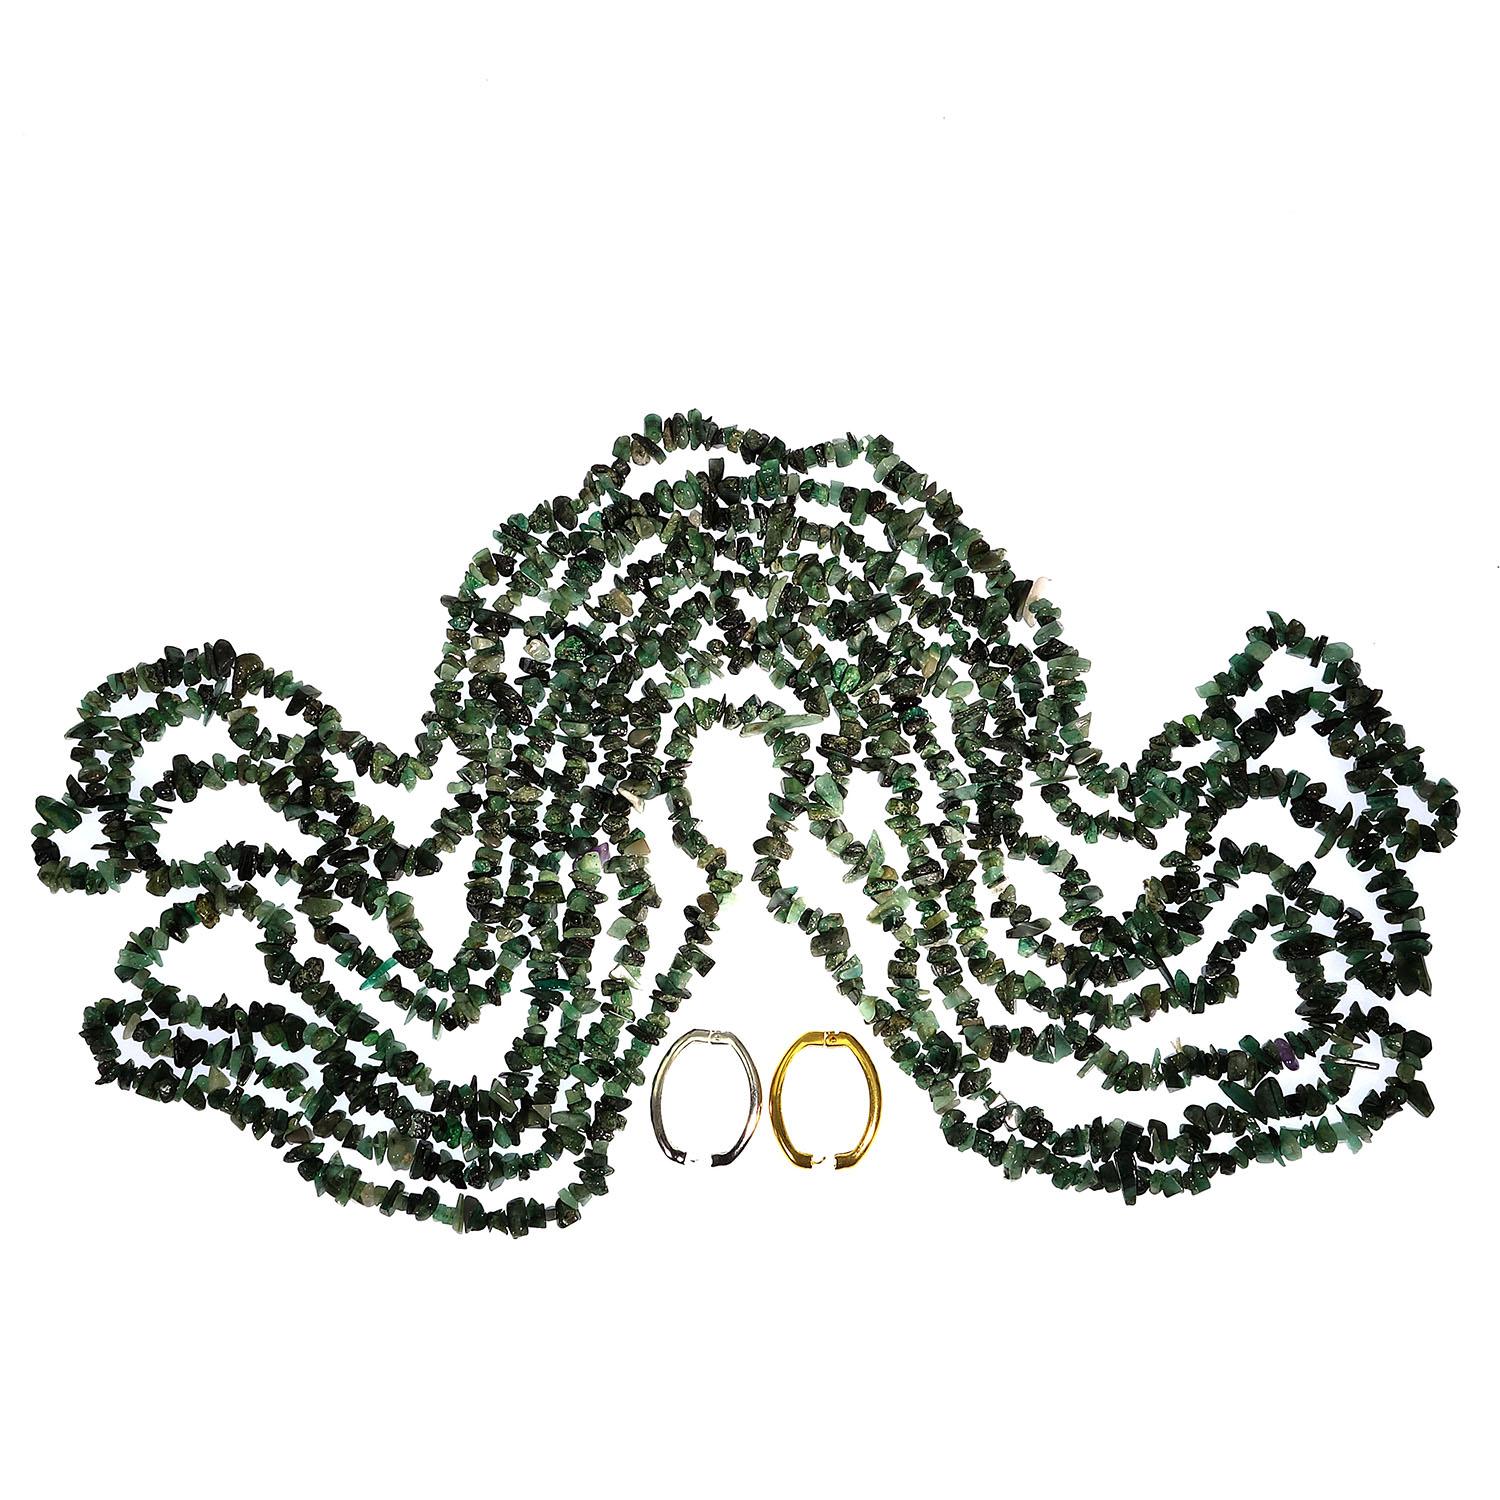 Necklace of green Emerald chips in four continuous strands 2